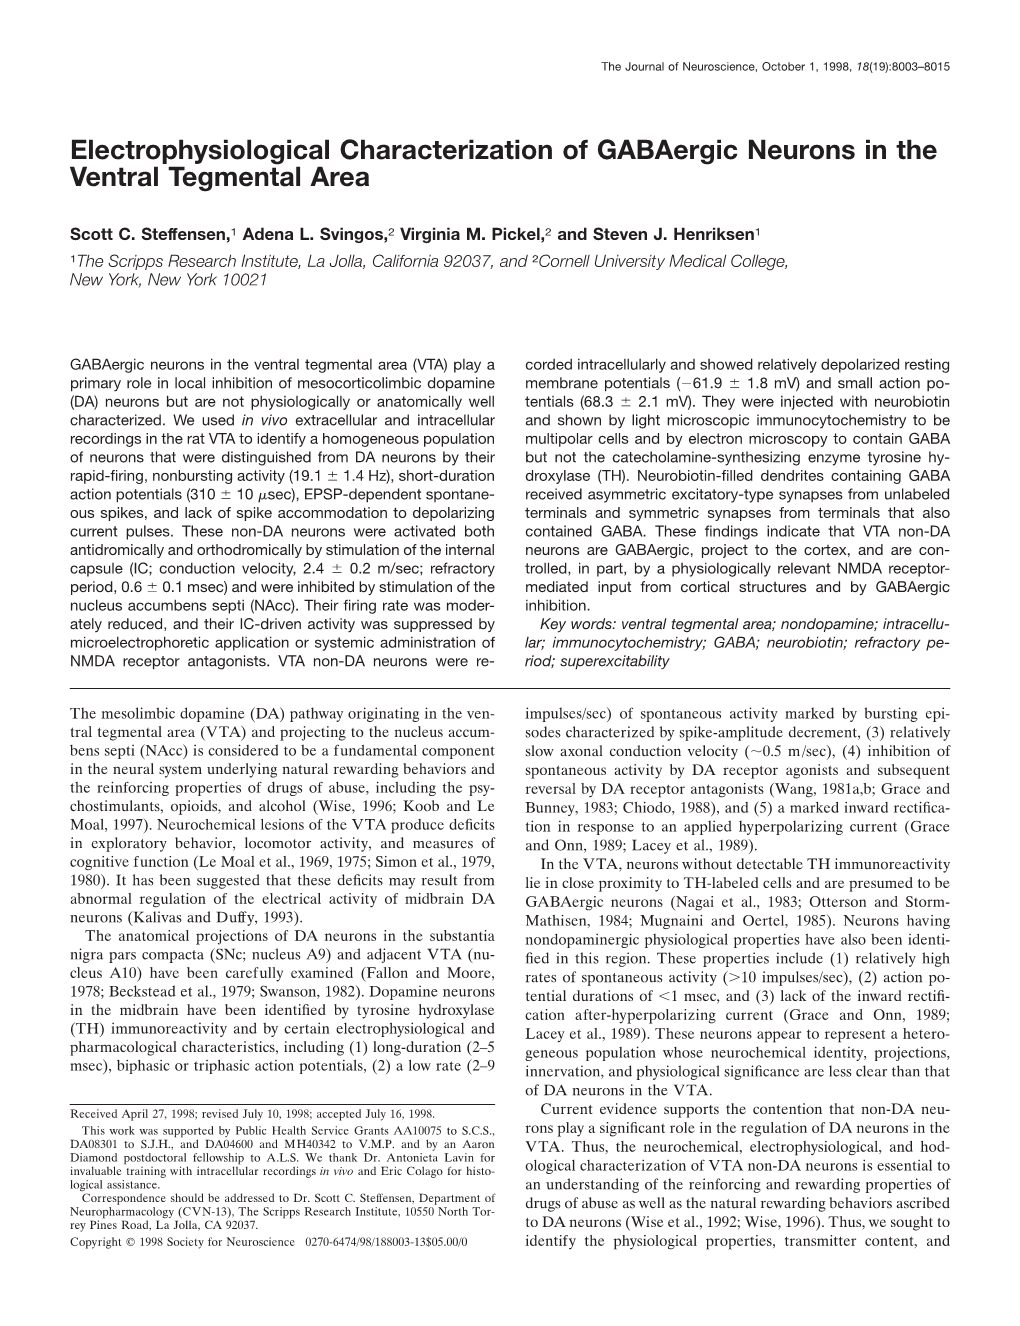 Electrophysiological Characterization of Gabaergic Neurons in the Ventral Tegmental Area